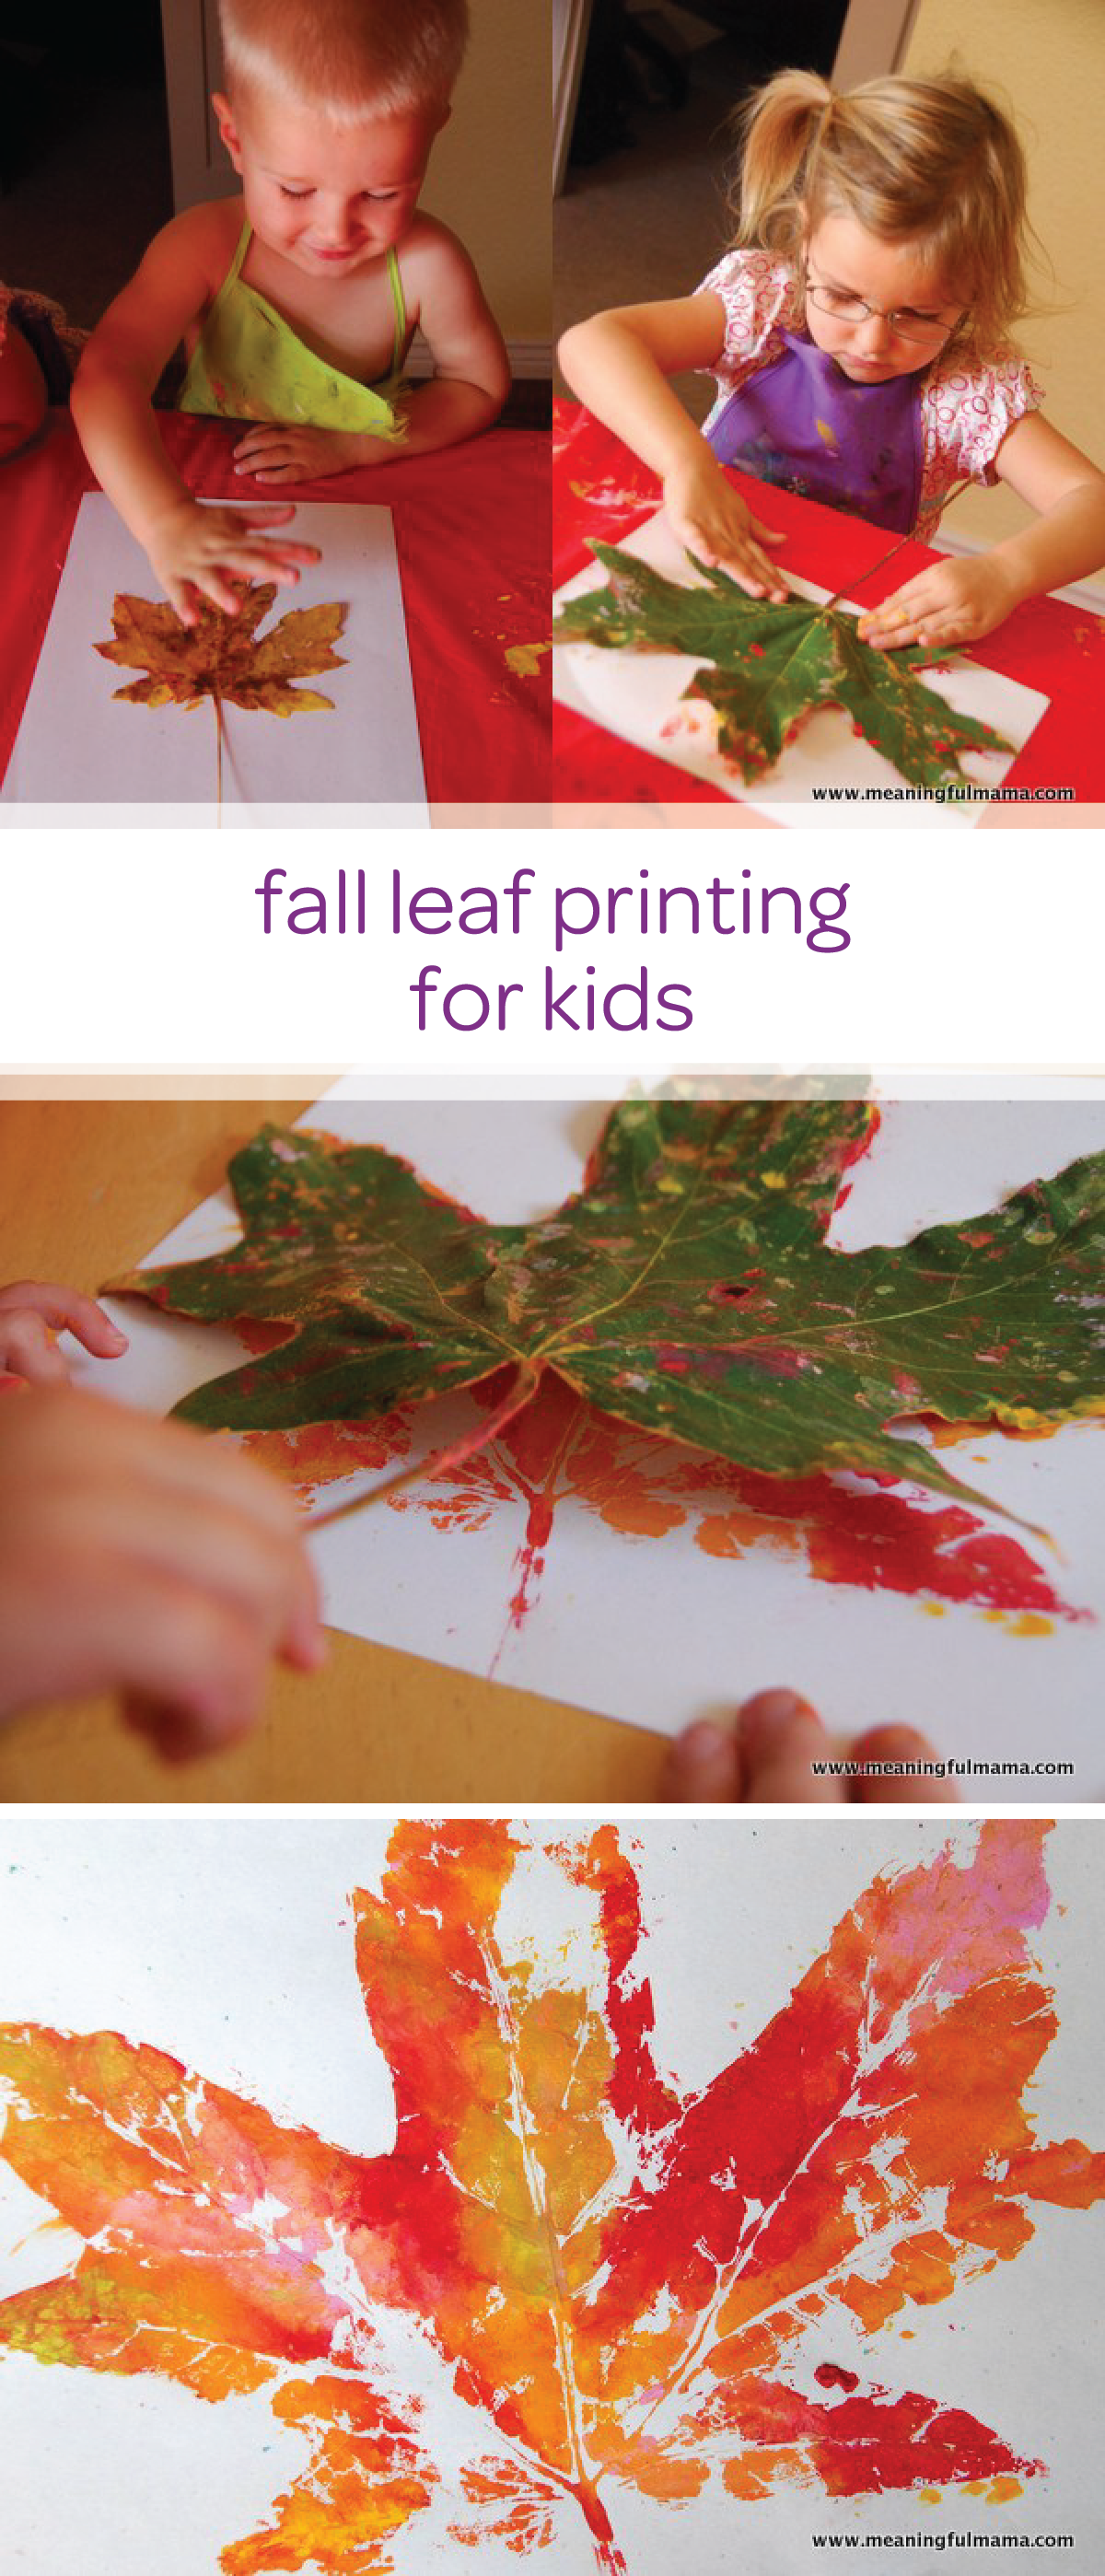 Let your little one enjoy an afternoon of painting and making a mess with child-safe paint and create this fall leaf printing